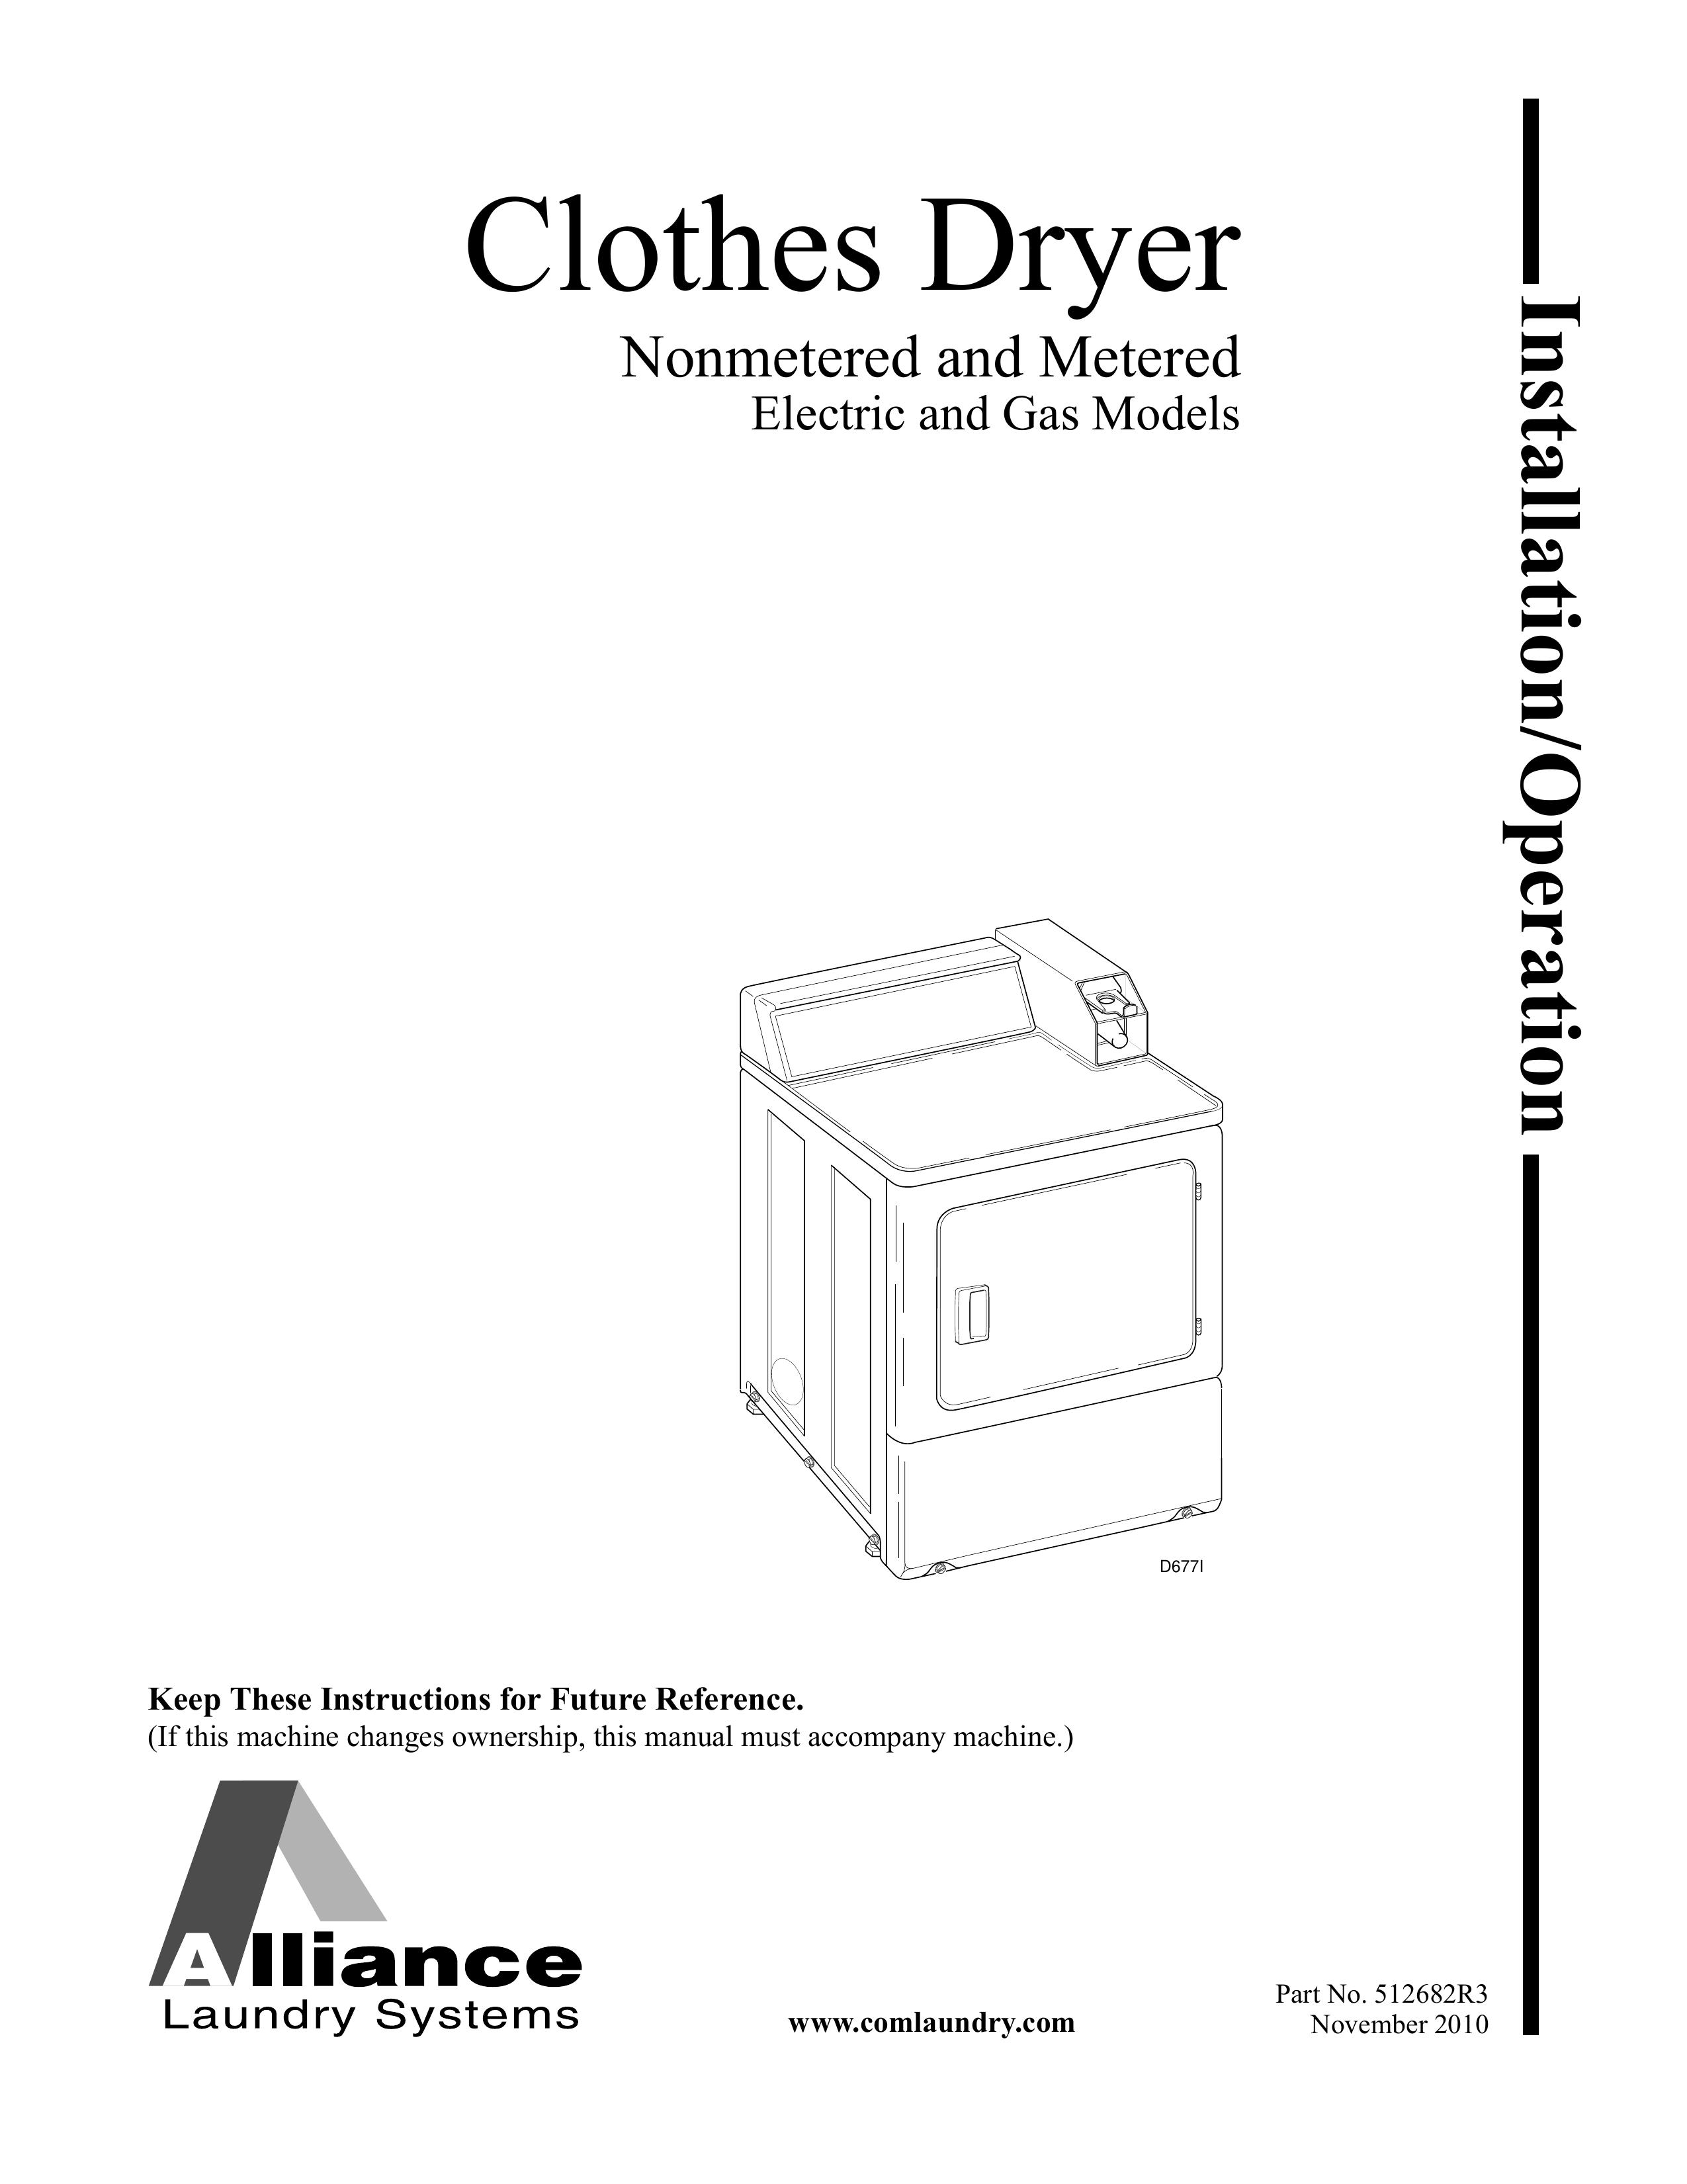 Alliance Laundry Systems D677I Clothes Dryer User Manual